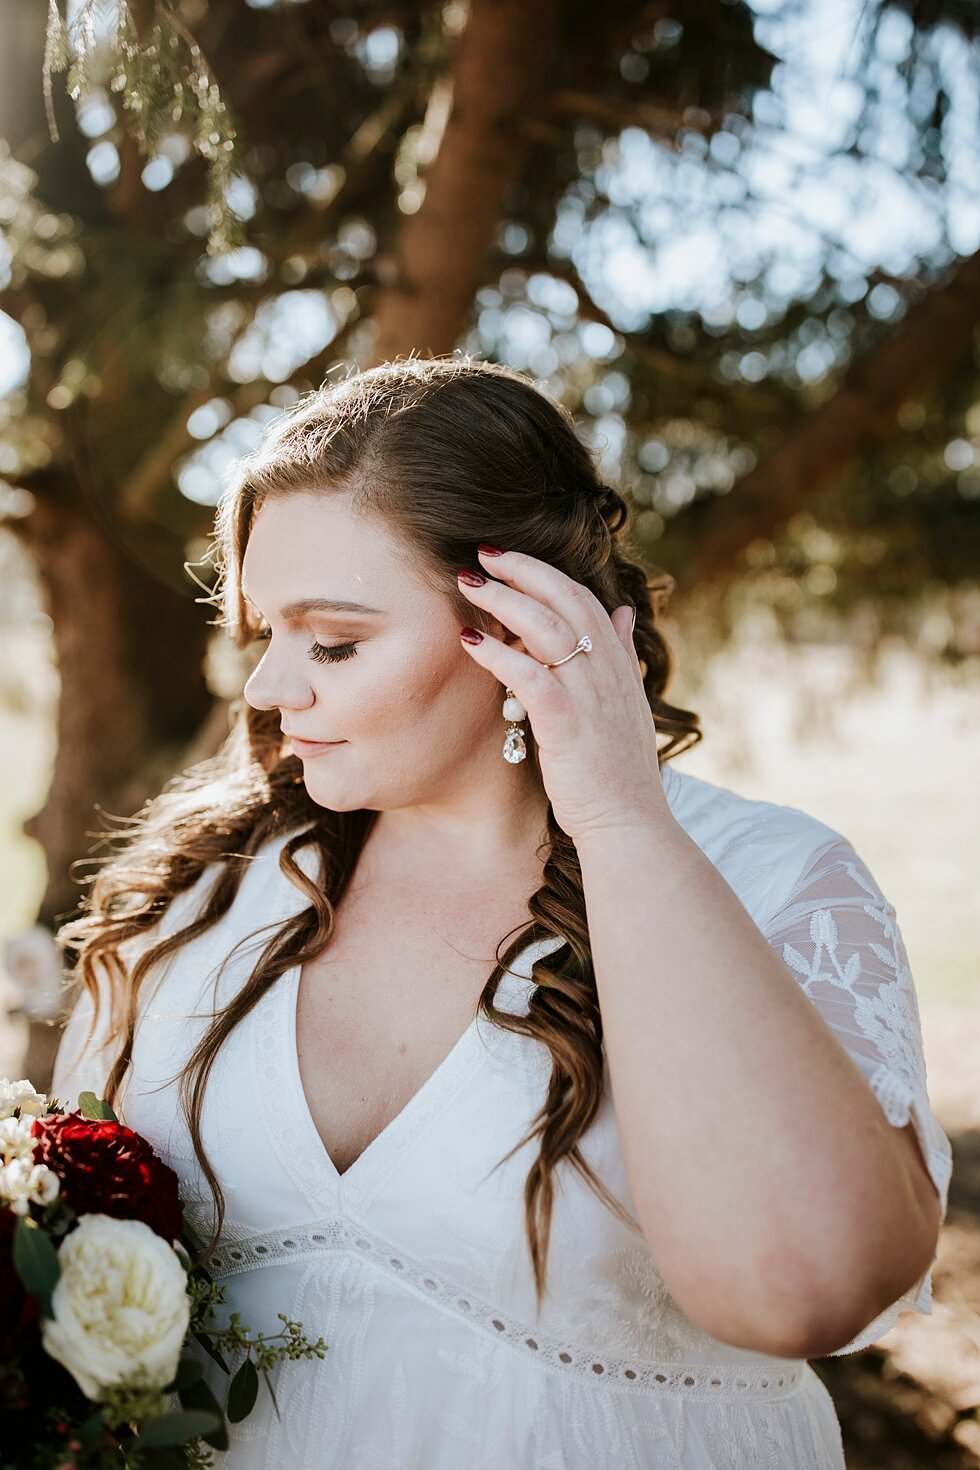  Stunning bride getting ready to walk down the aisle during her micro wedding in hopes that a much larger celebration of this special day will take place in the very near future. Southern wedding Indiana intimate wedding small ceremony microceremony 